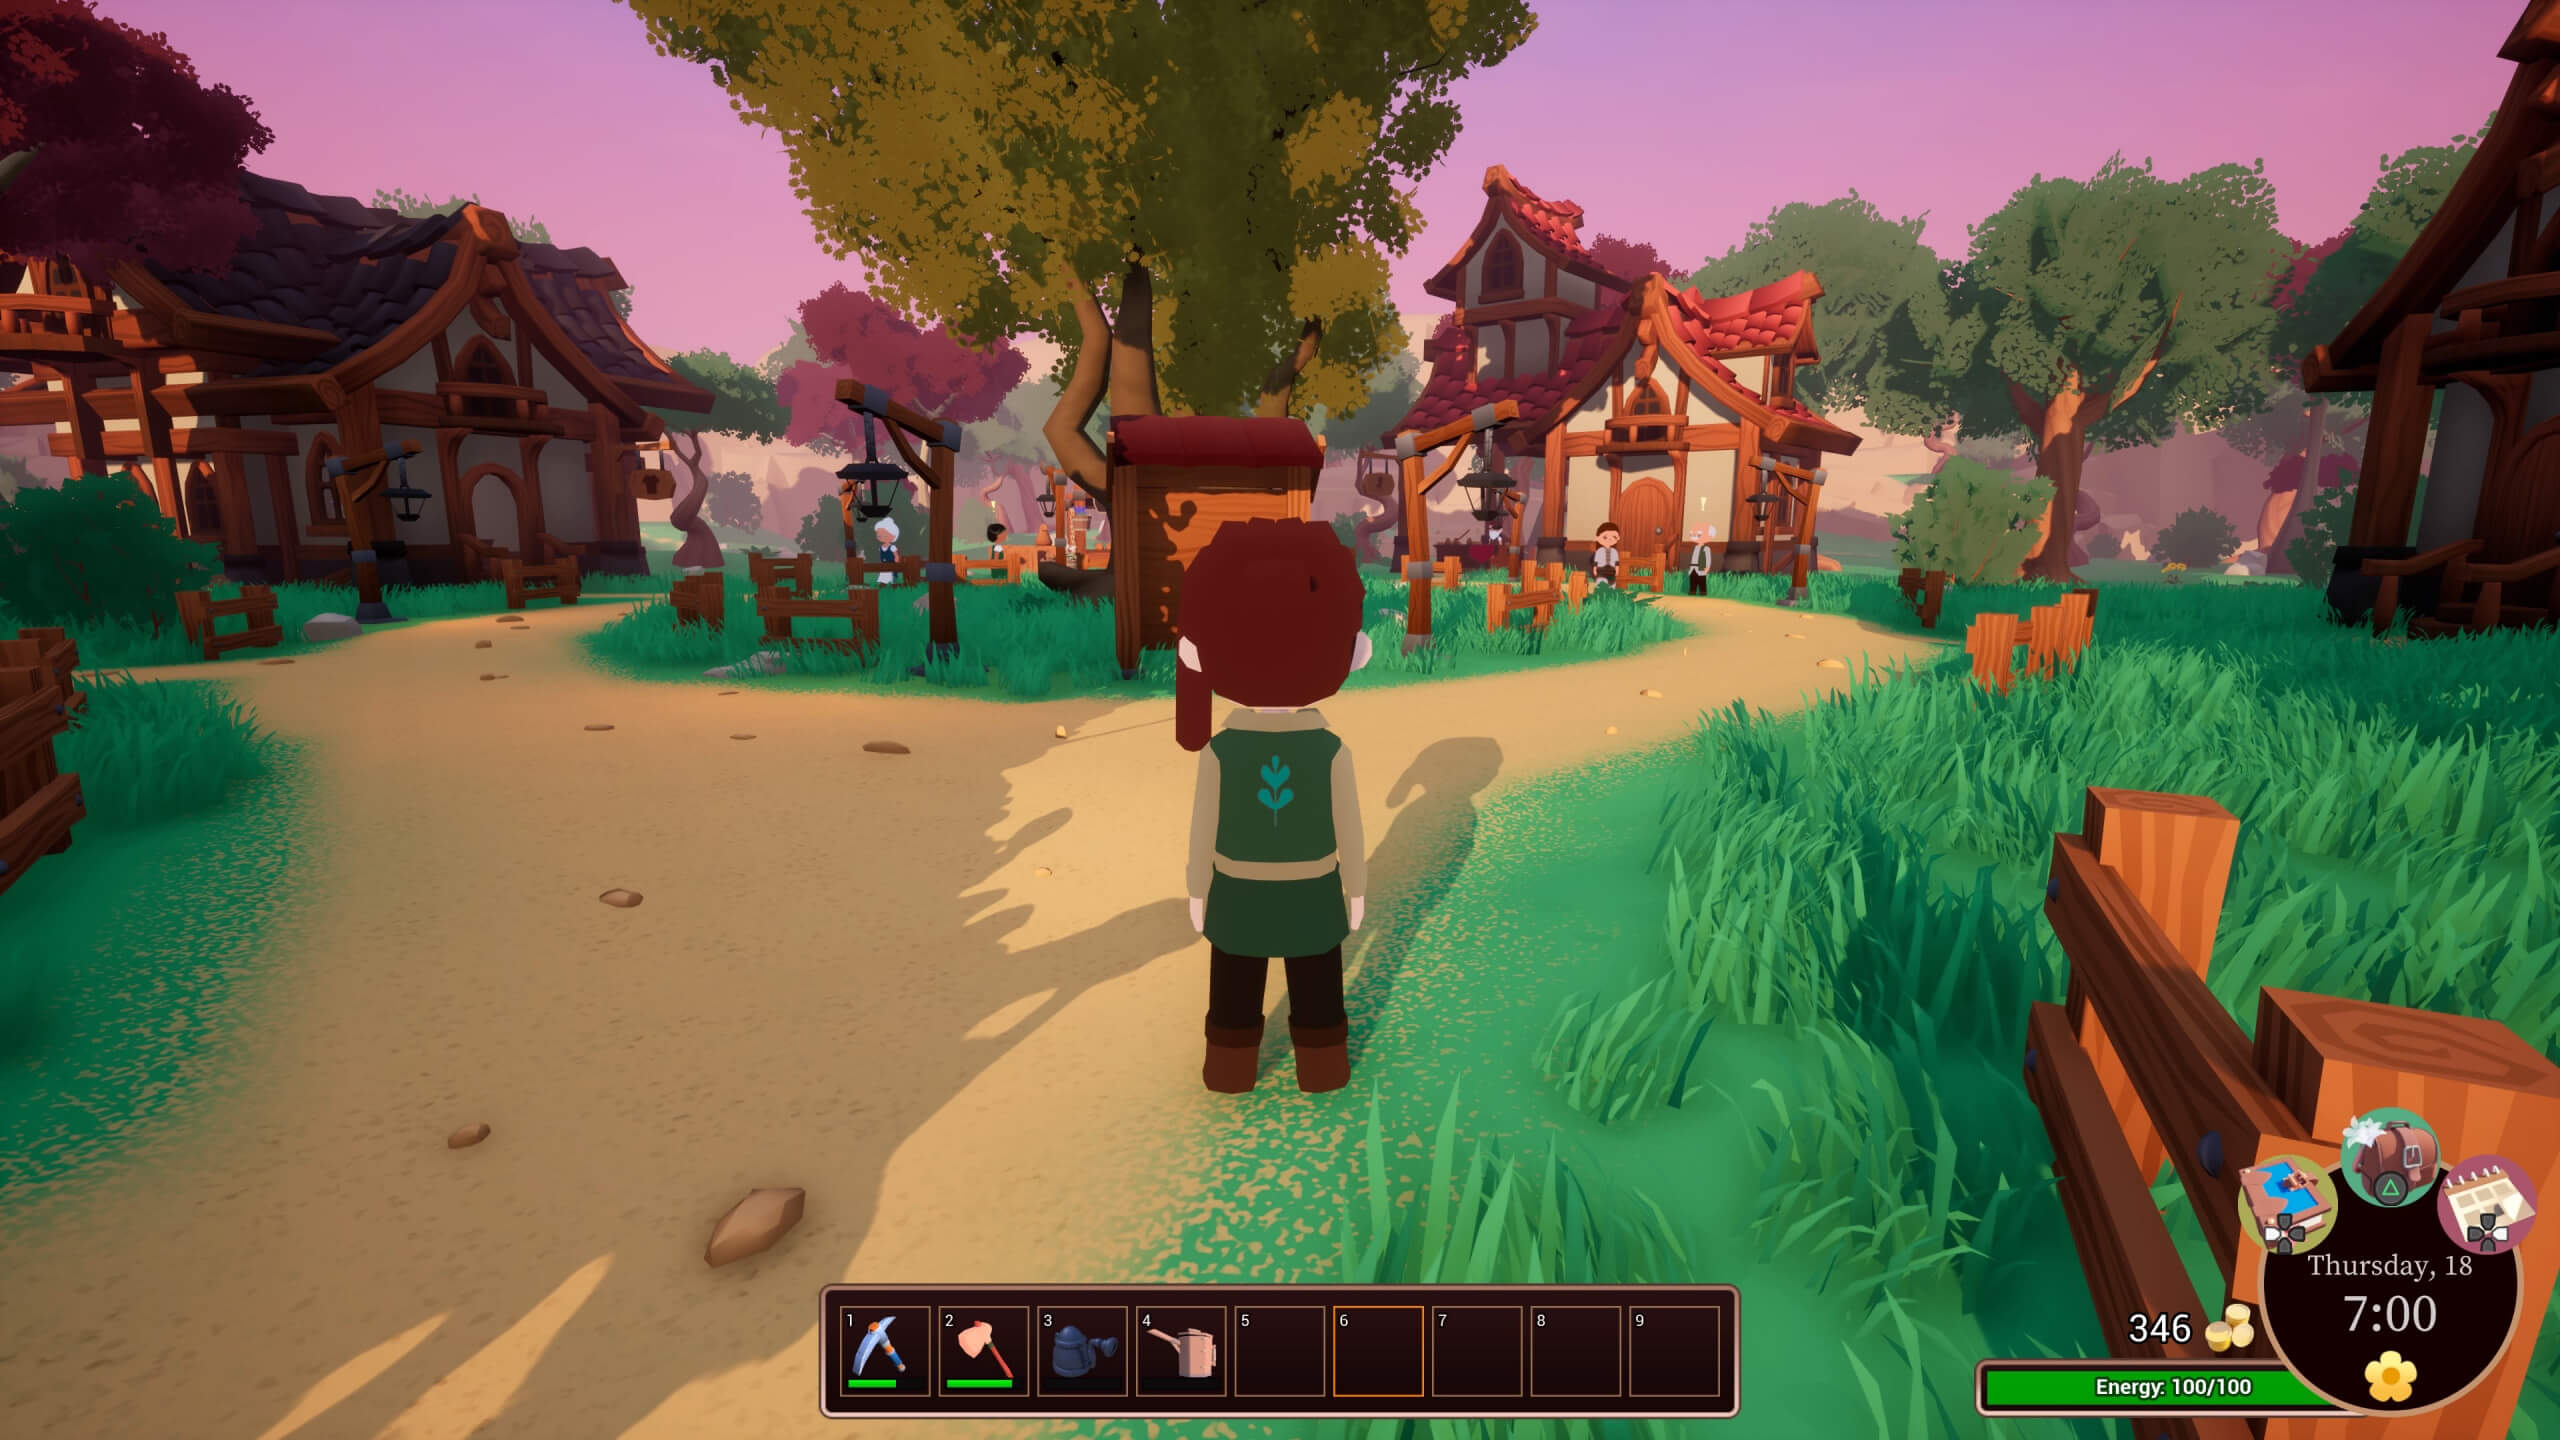 An image showing your Alchemy Garden created character stand in the game's town.